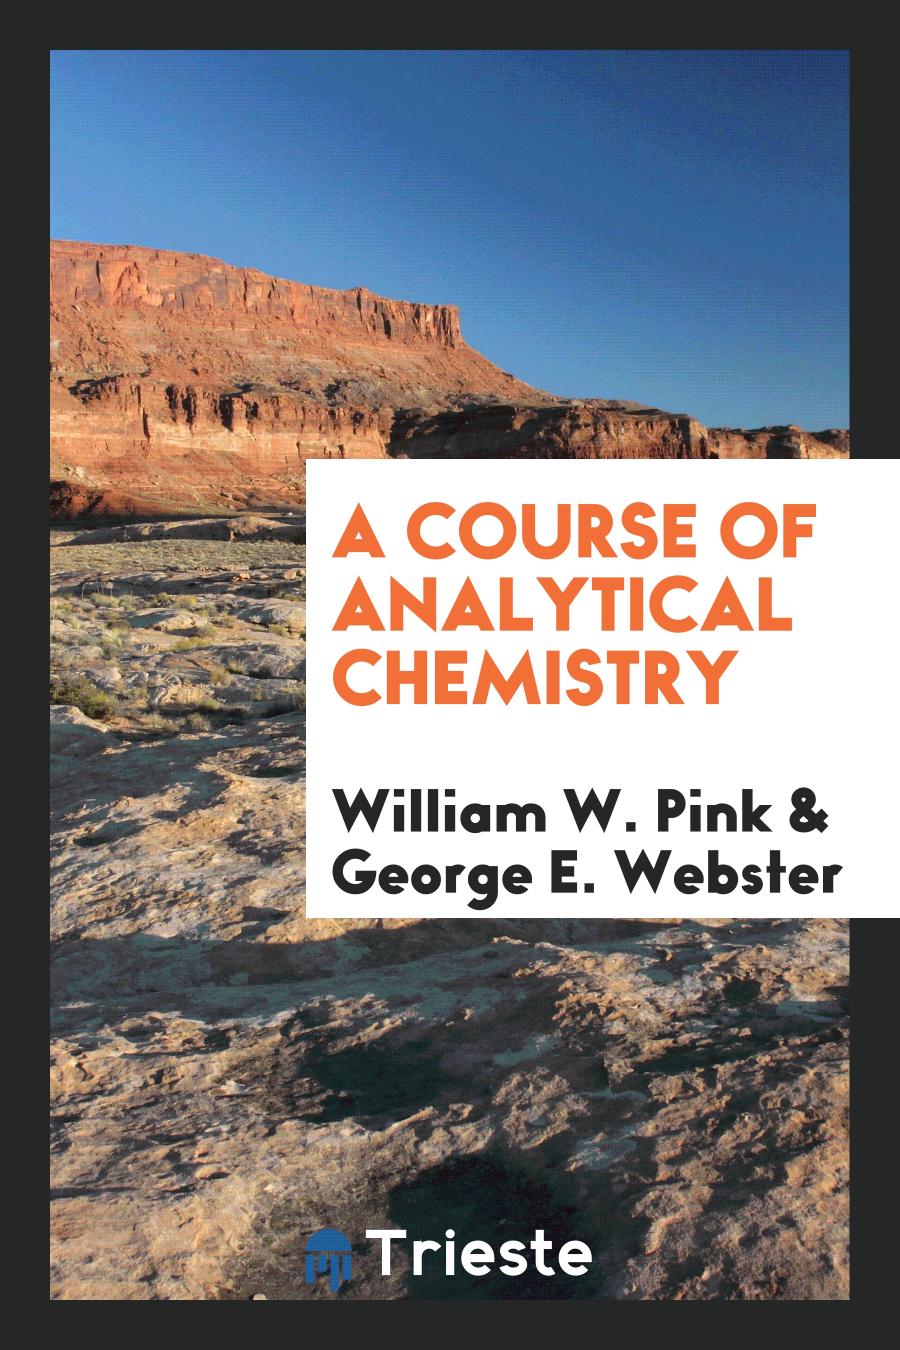 A Course of Analytical Chemistry